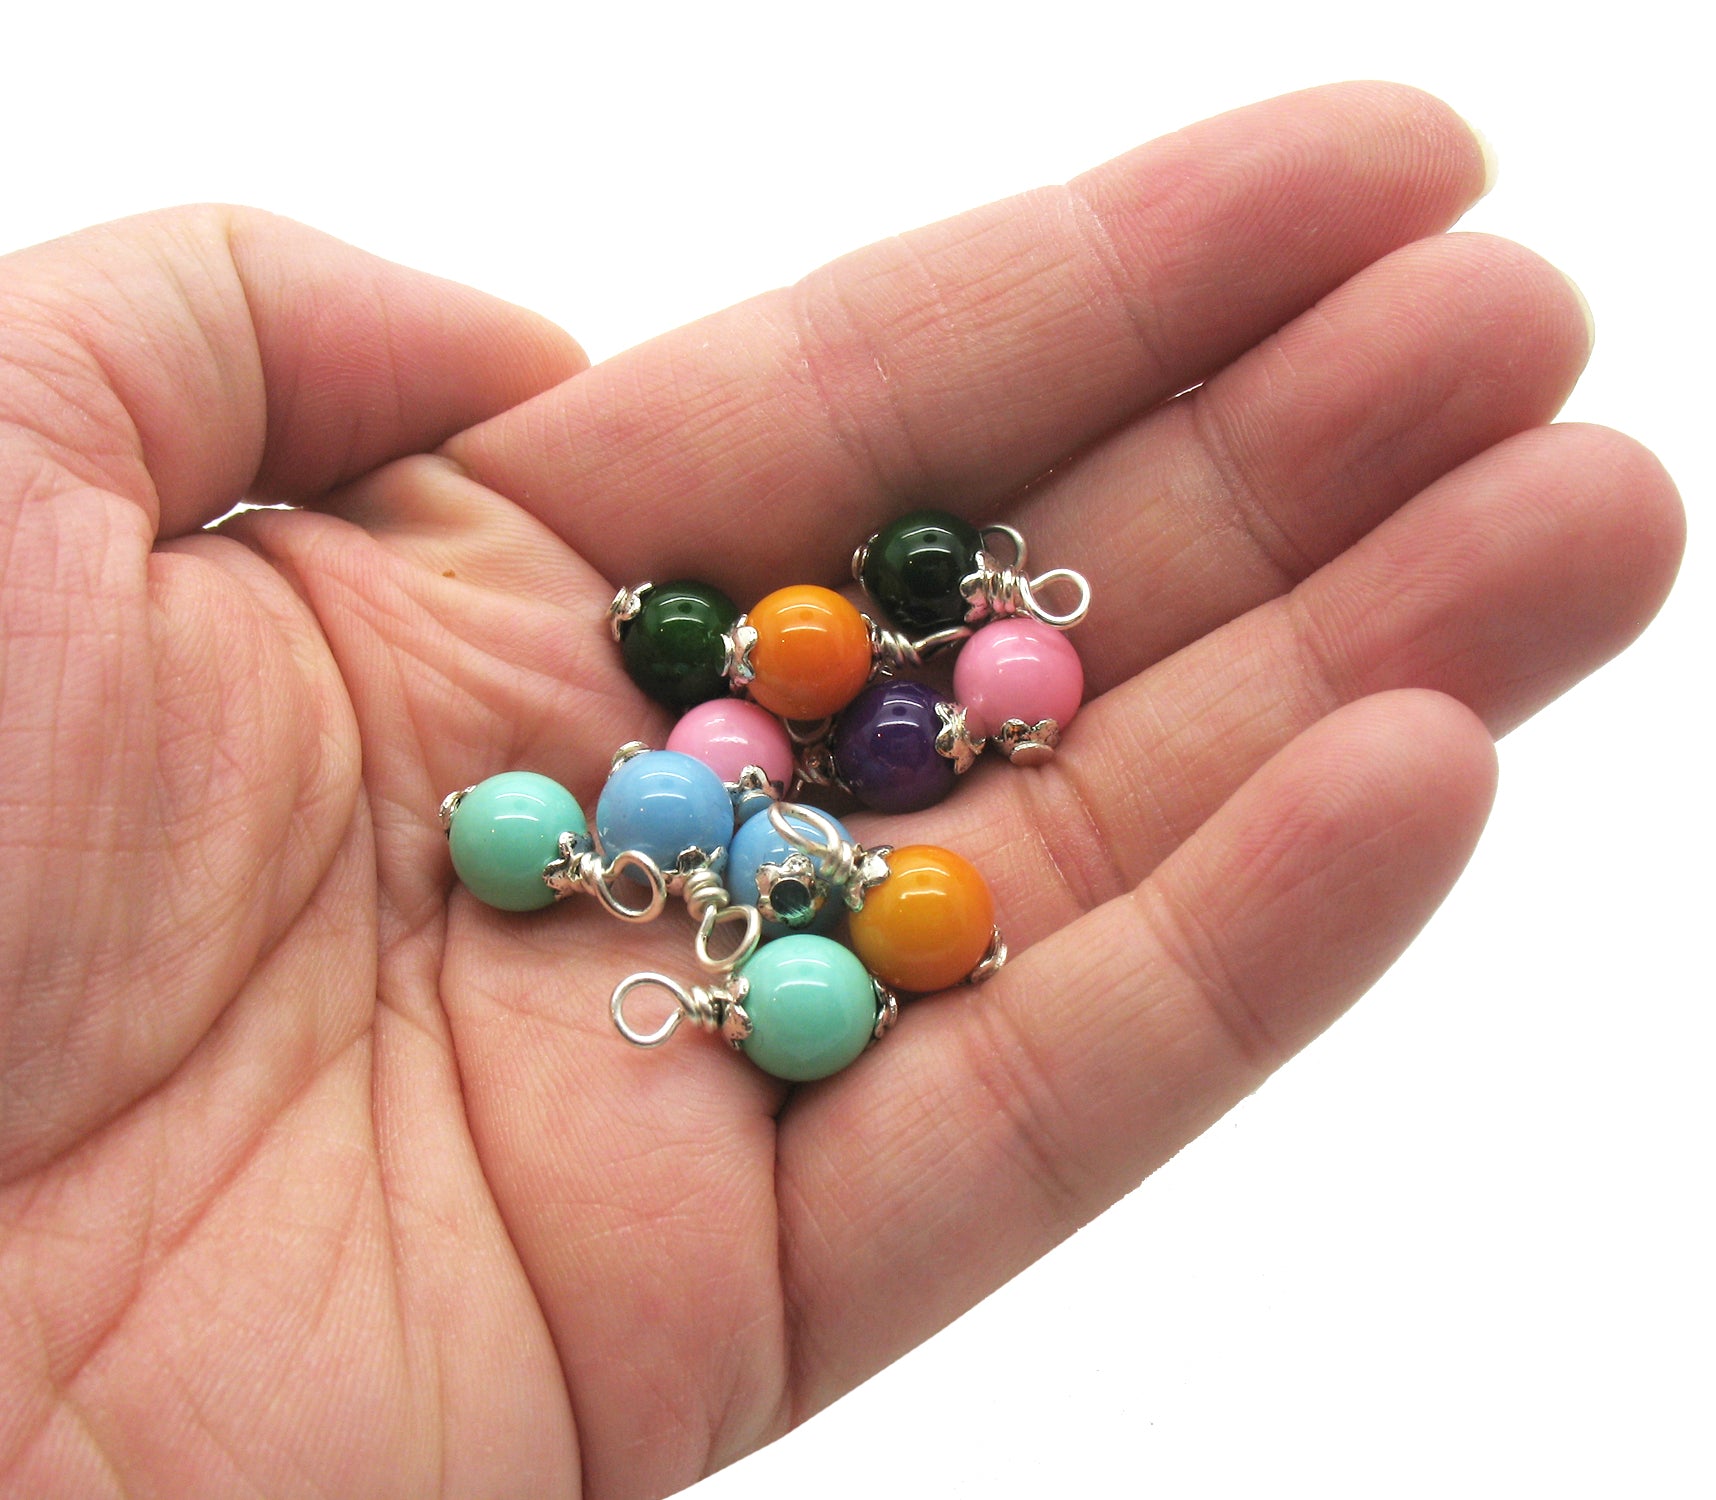 Glass Charms for Earrings - 6 pairs of Pretty Earring Dangles - Adorabilities Charms & Trinkets